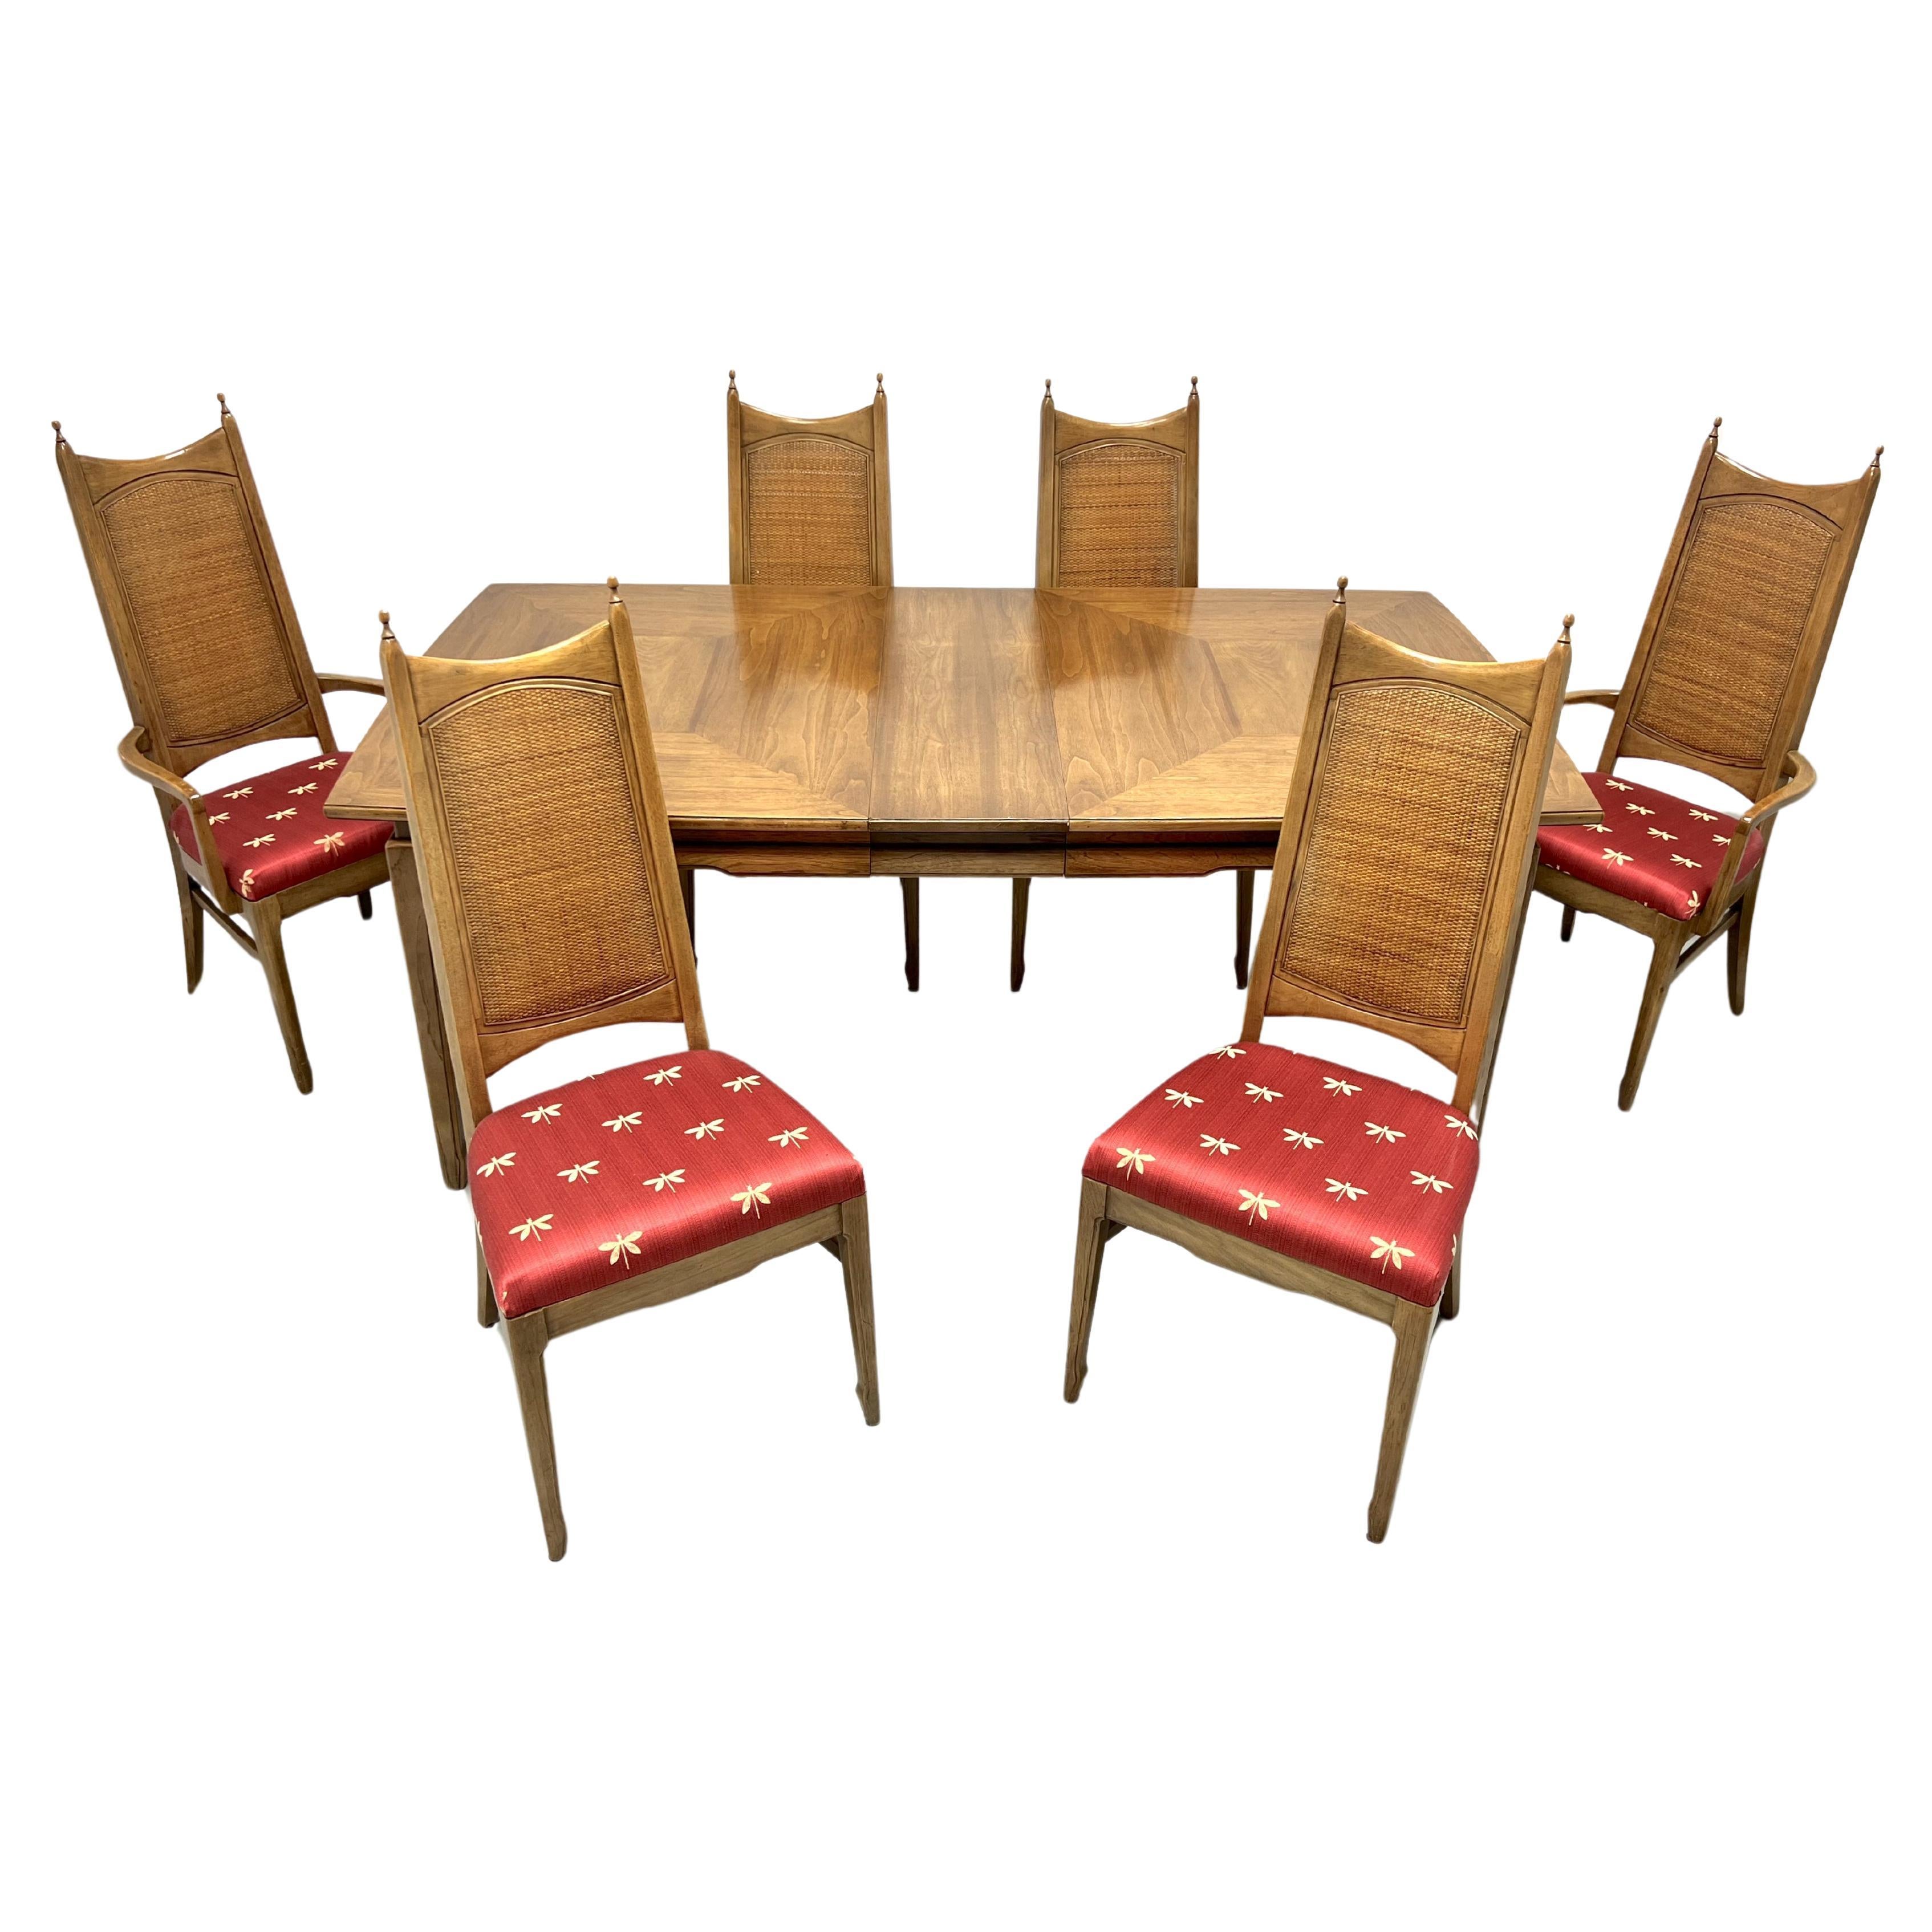 THOMASVILLE Pecan Mid 20th Century Modern MCM Dining Table Set with 6 Chairs